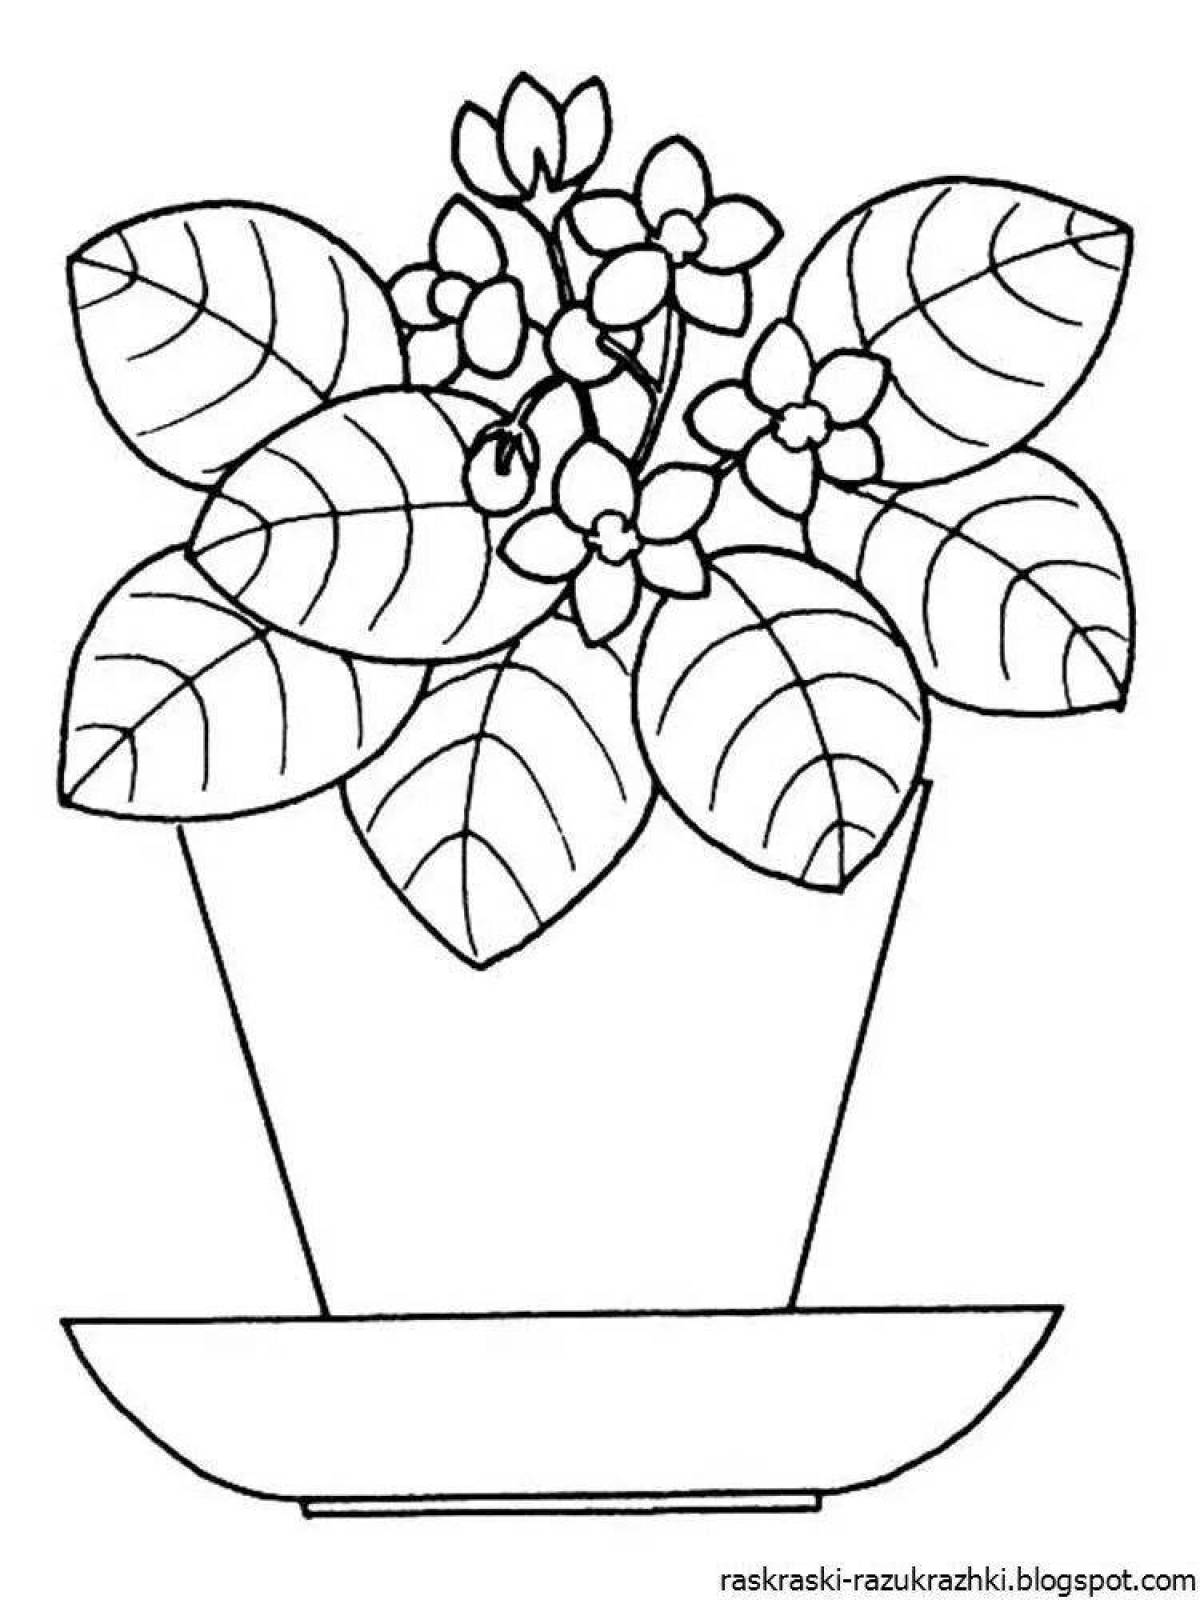 Creative houseplant coloring for kids